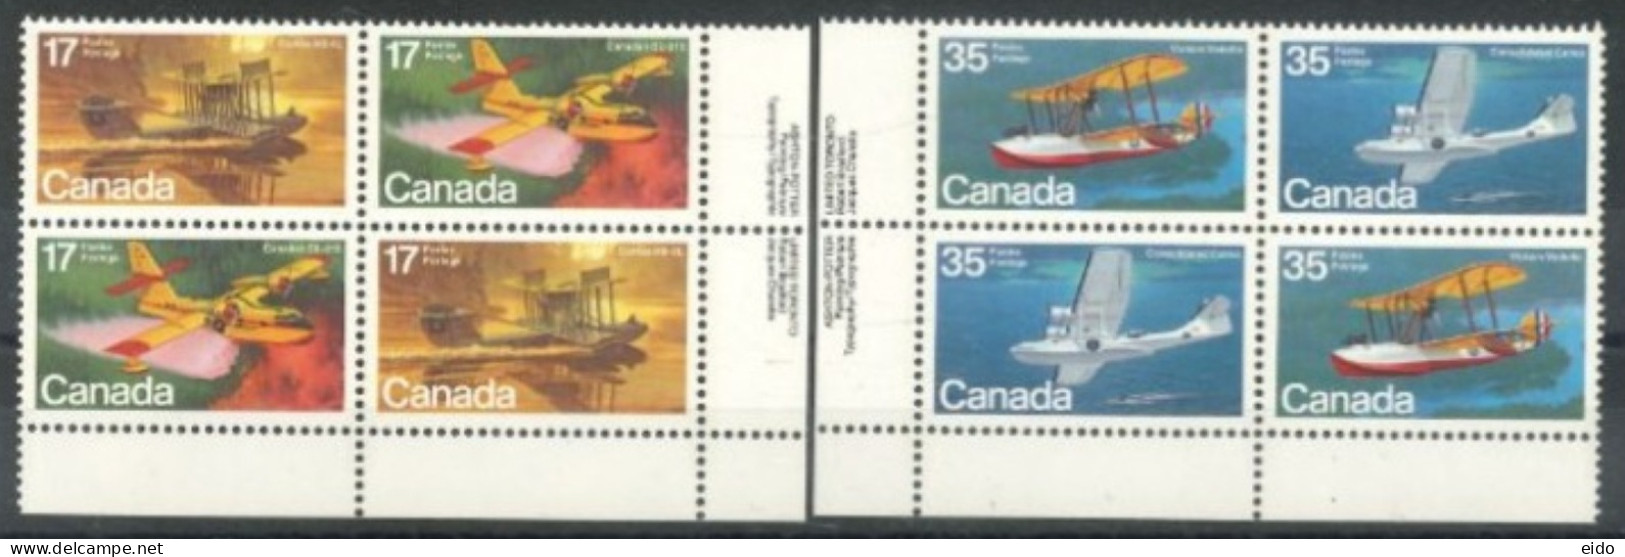 CANADA - 1979, CANADIAN AIRCRAFT (FIRST SERIES), FLYING BOATS STAMPS COMPLETE SET OF 4, 2 OF EACH, UMM (**). - Neufs